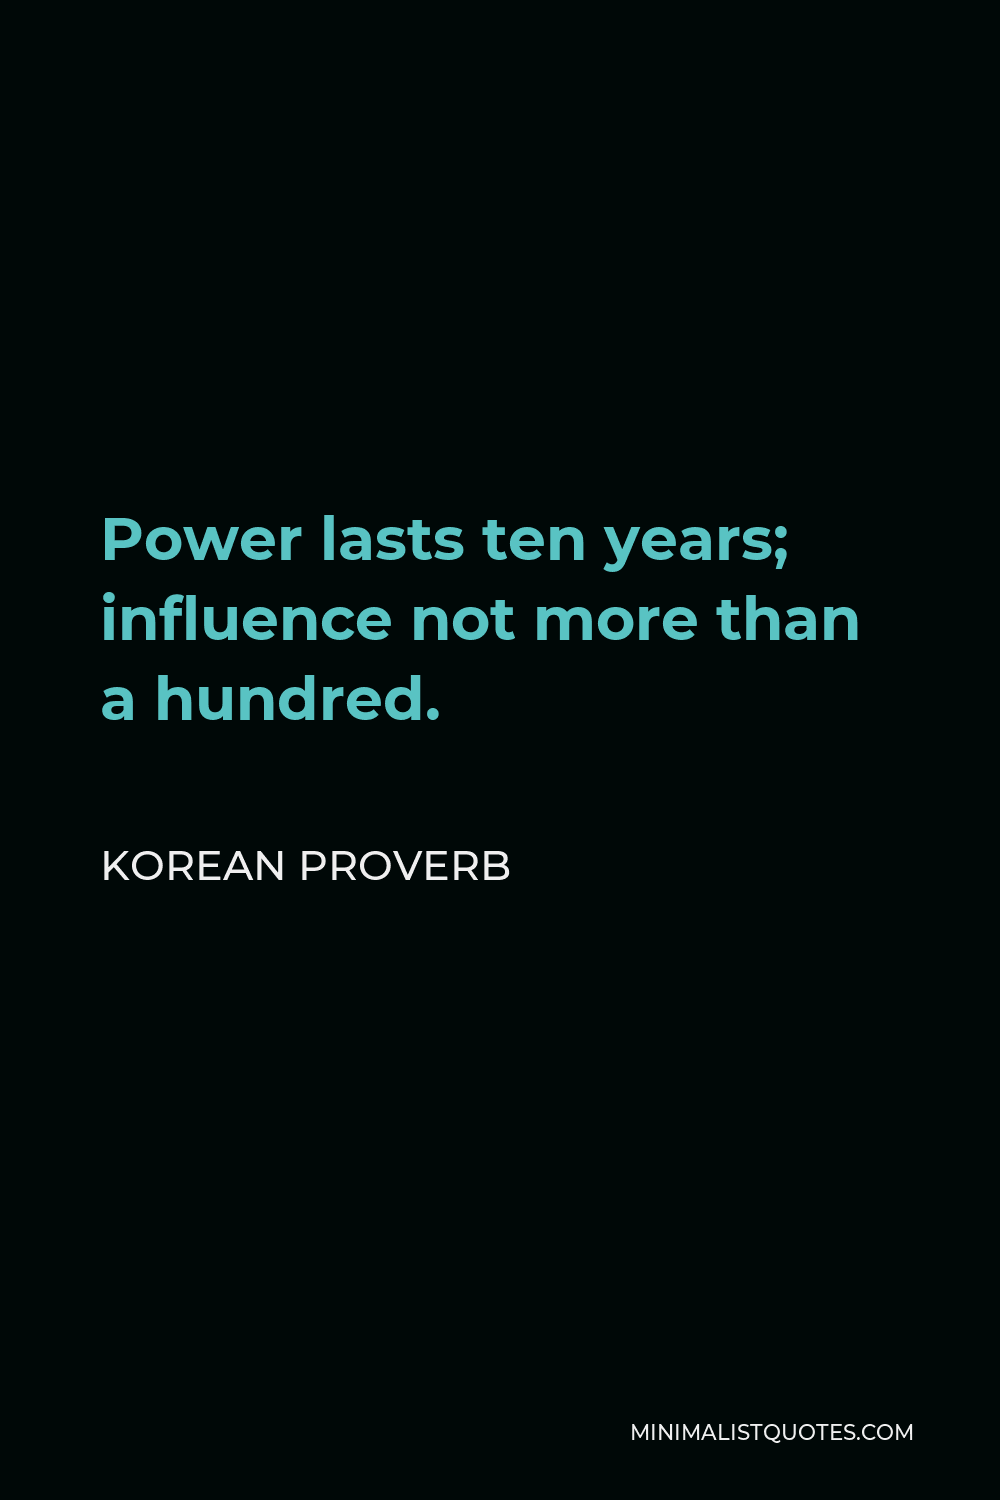 Korean Proverb Quote - Power lasts ten years; influence not more than a hundred.